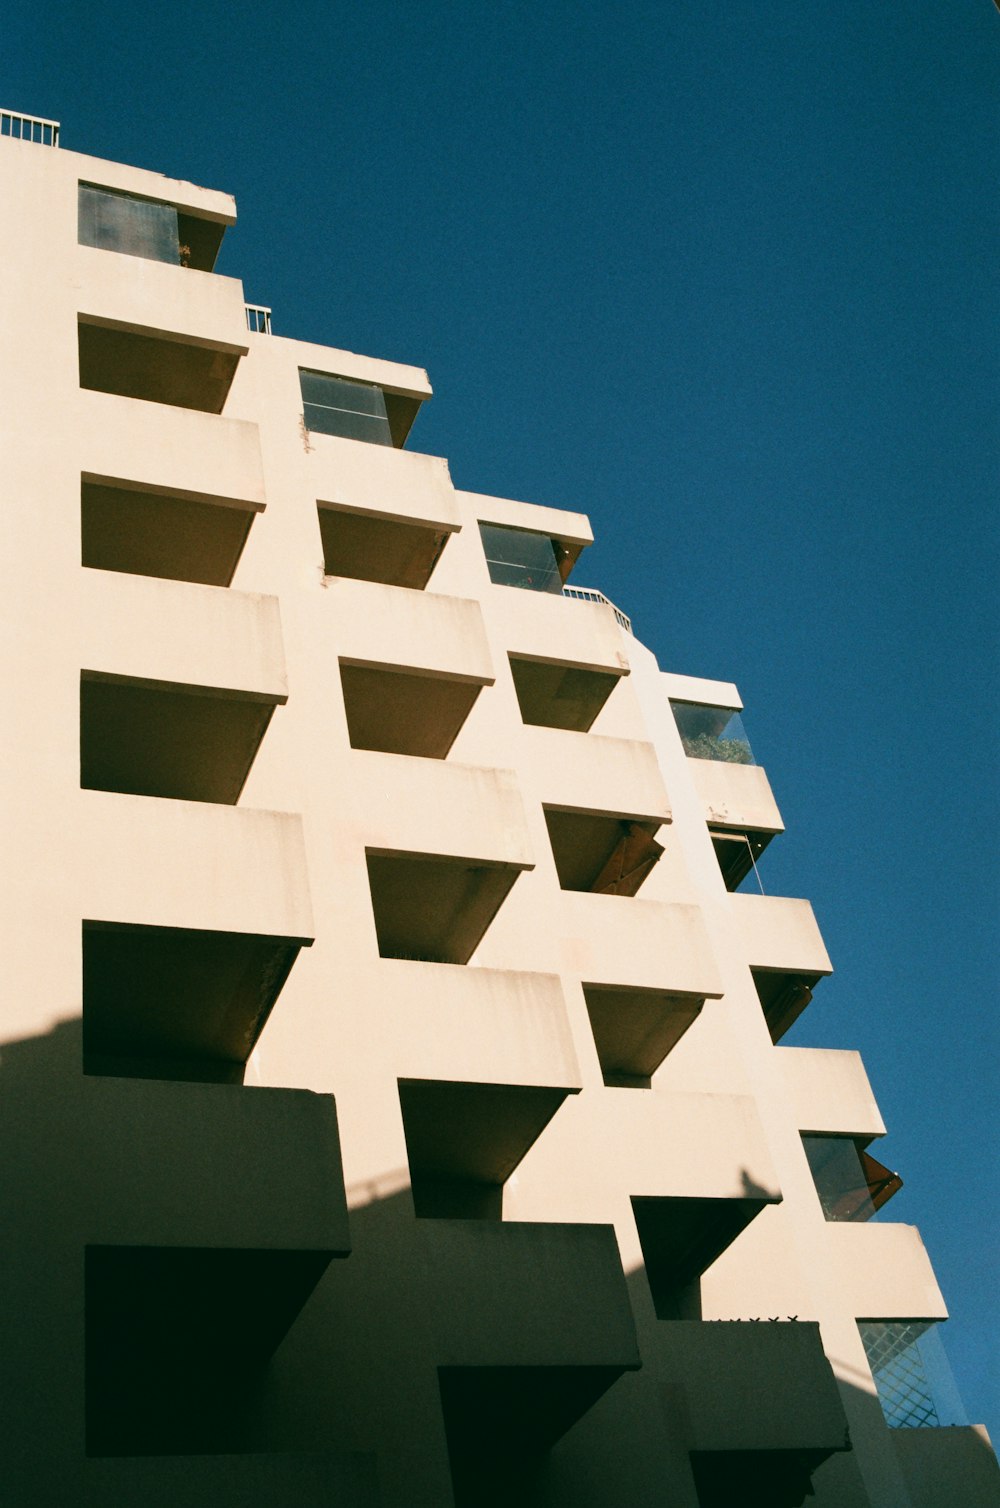 a tall white building with balconies on the side